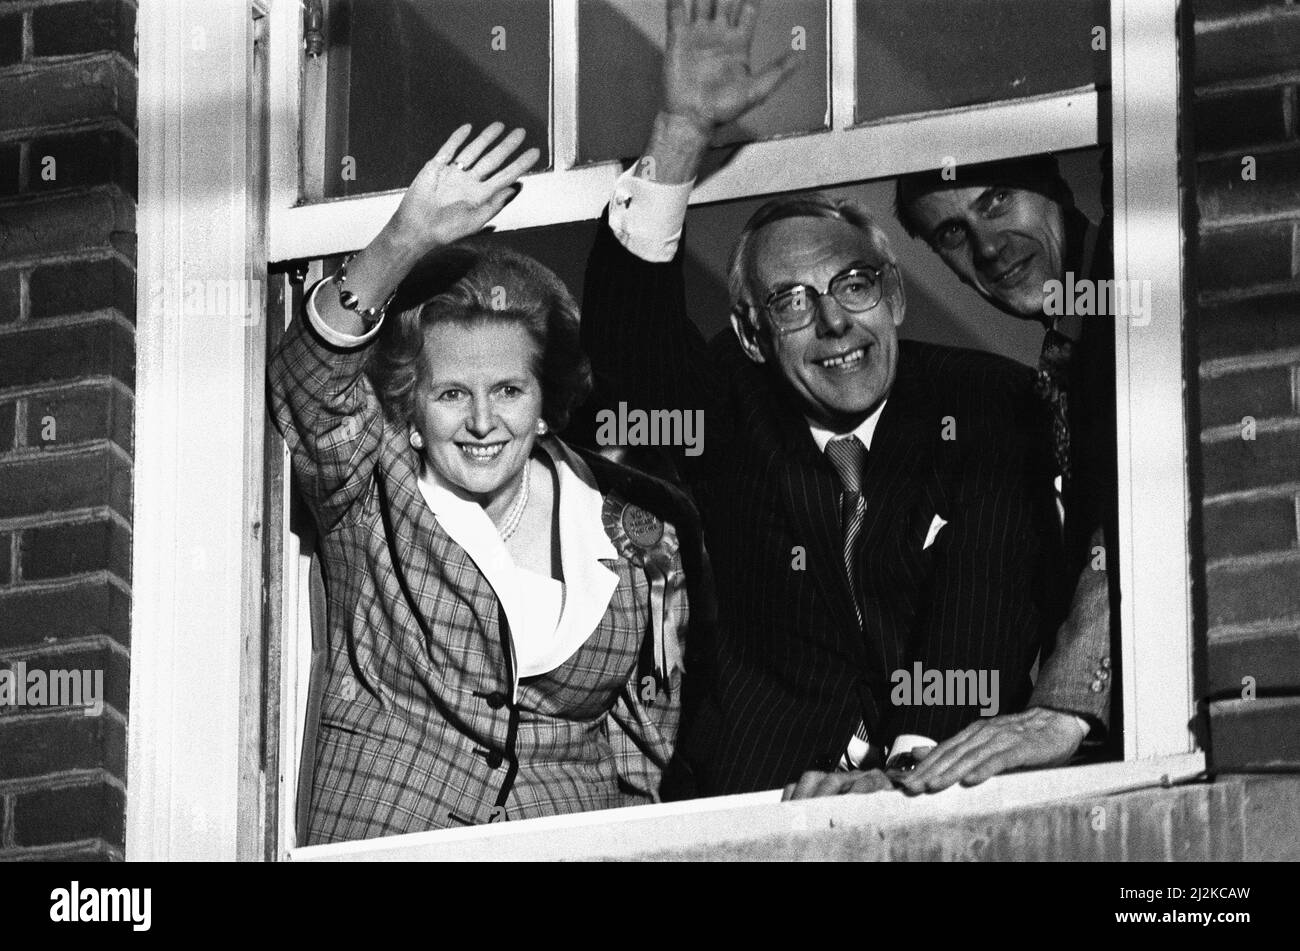 Prime Minister Margaret Thatcher, her husband, Denis Thatcher and Conservative Party chairman, Norman Tebbit, celebrate winning a third term in government for the Conservative Party, from a window at Conservative Central Office in Smith Square, Westminster. 12 June 1987. Stock Photo